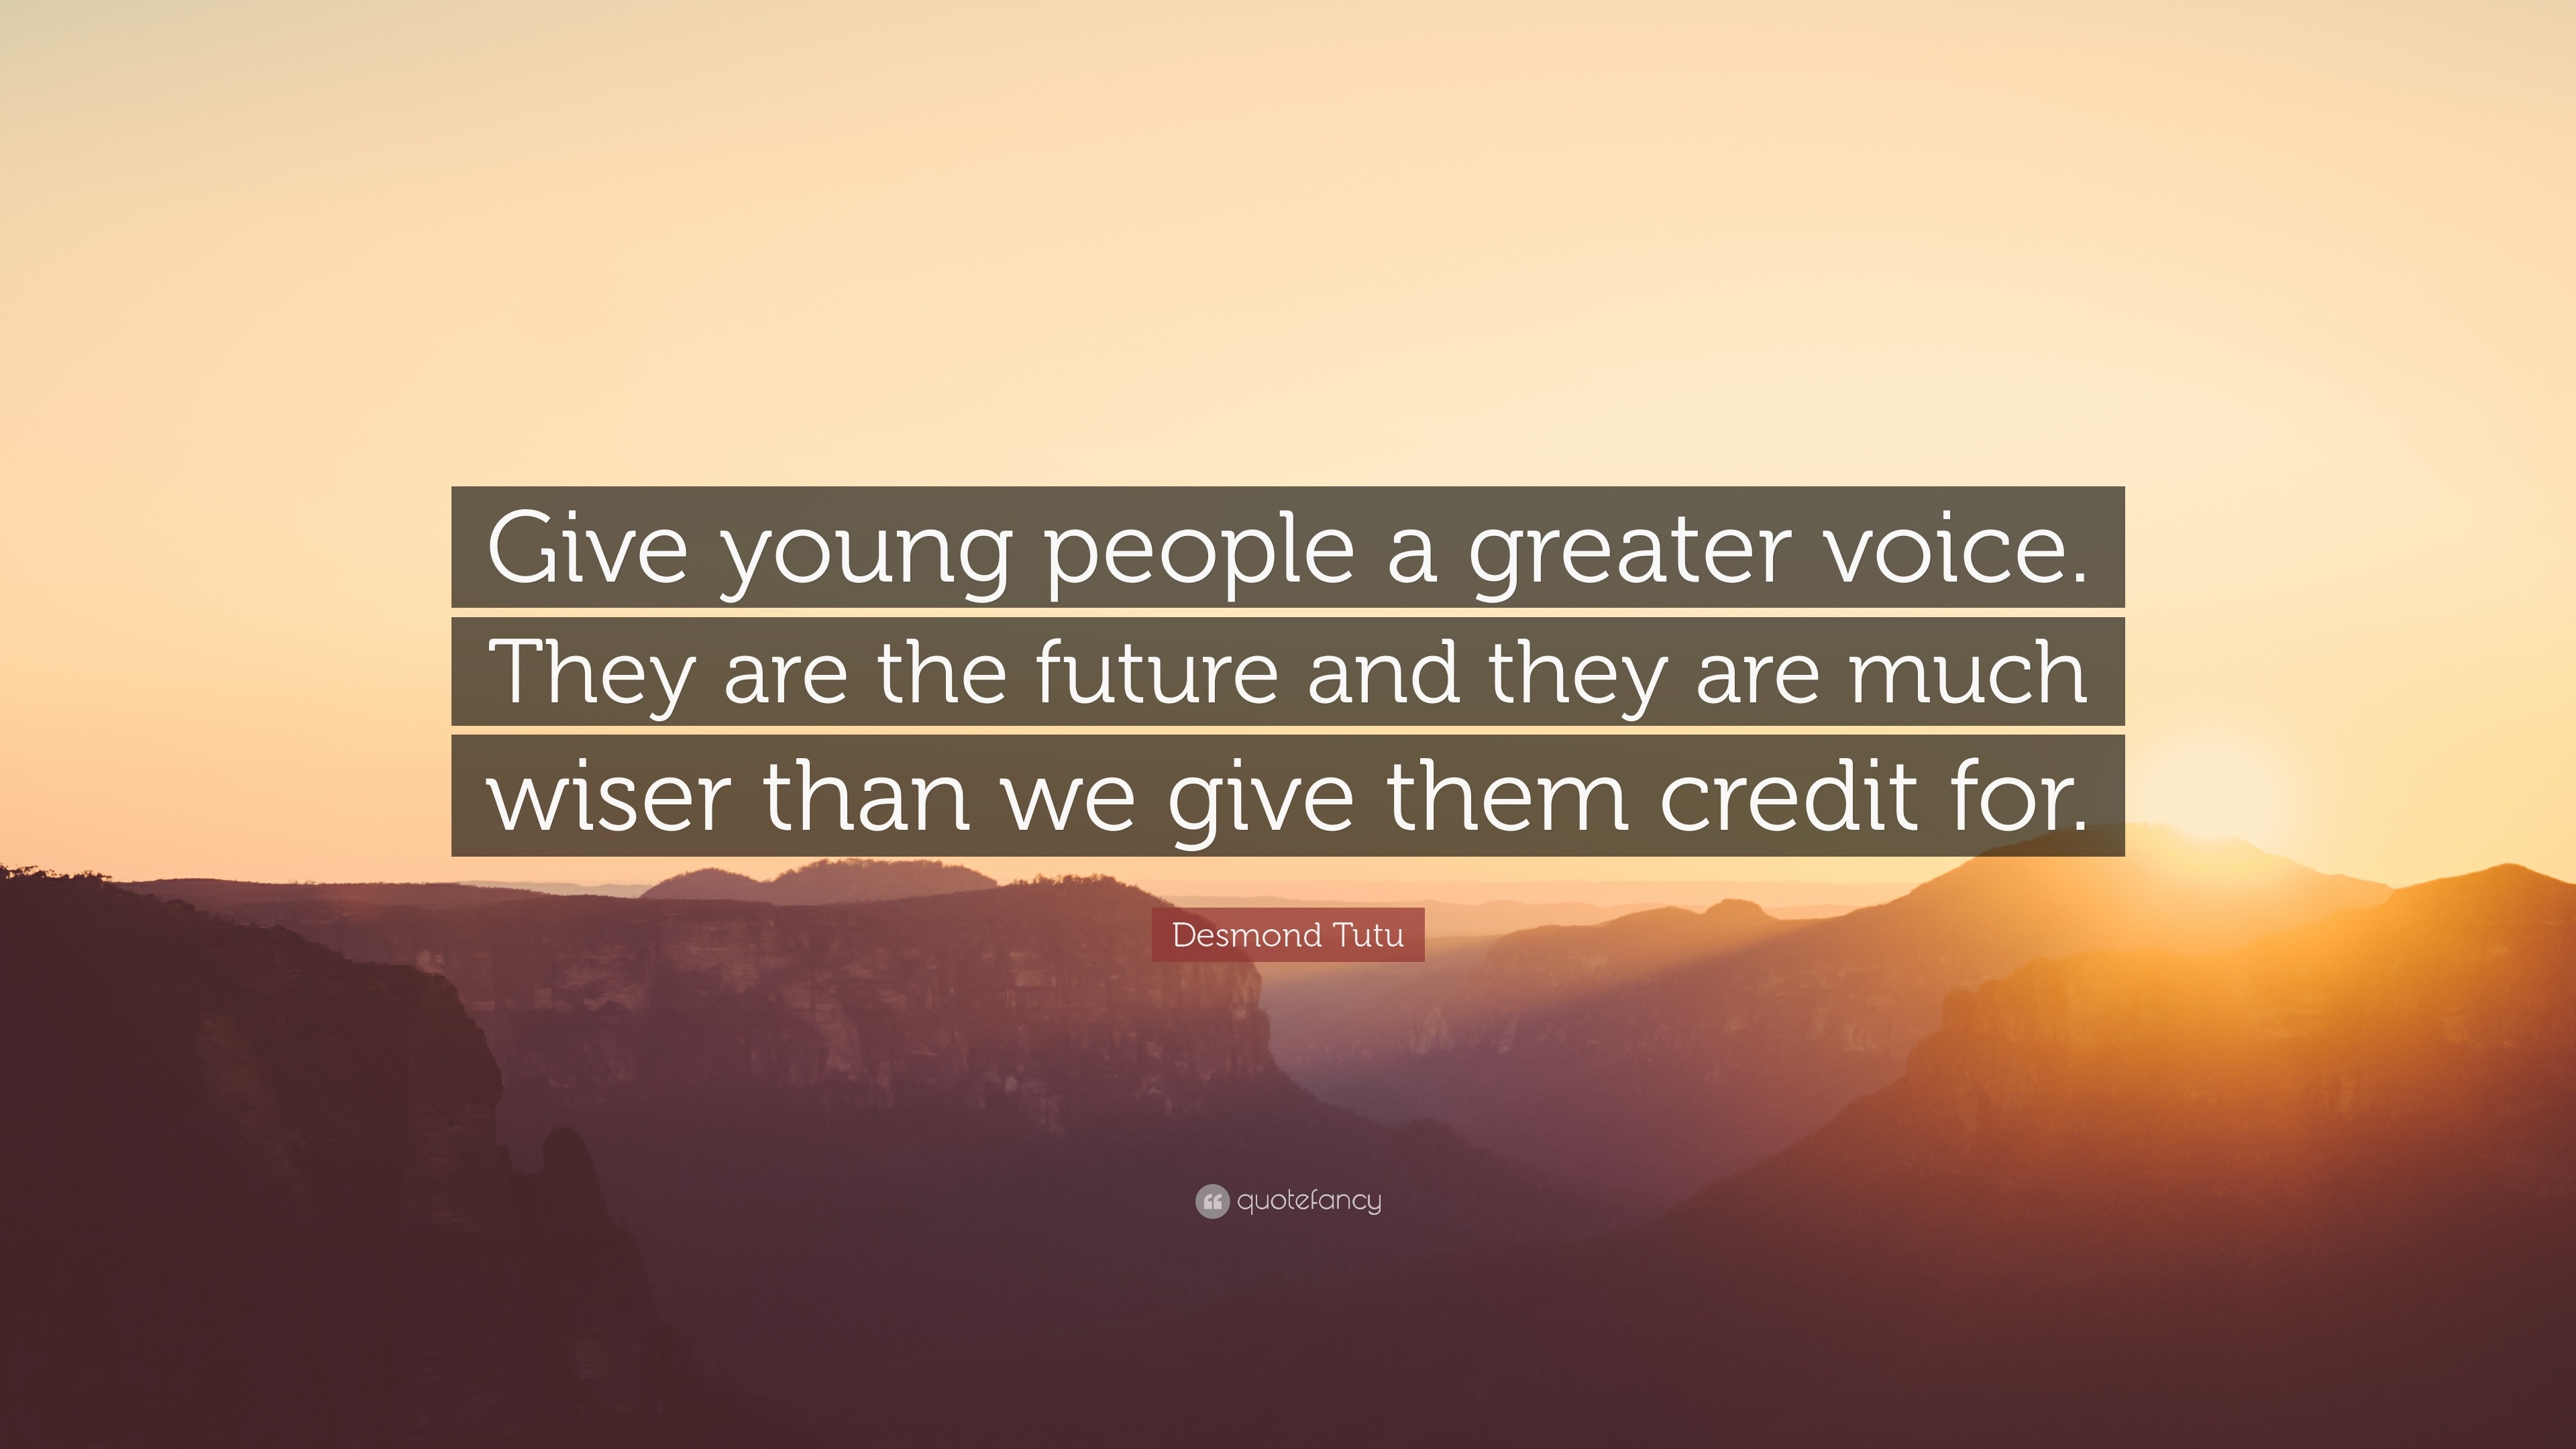 Desmond Tutu Quote: “Give young people a greater voice. They are the